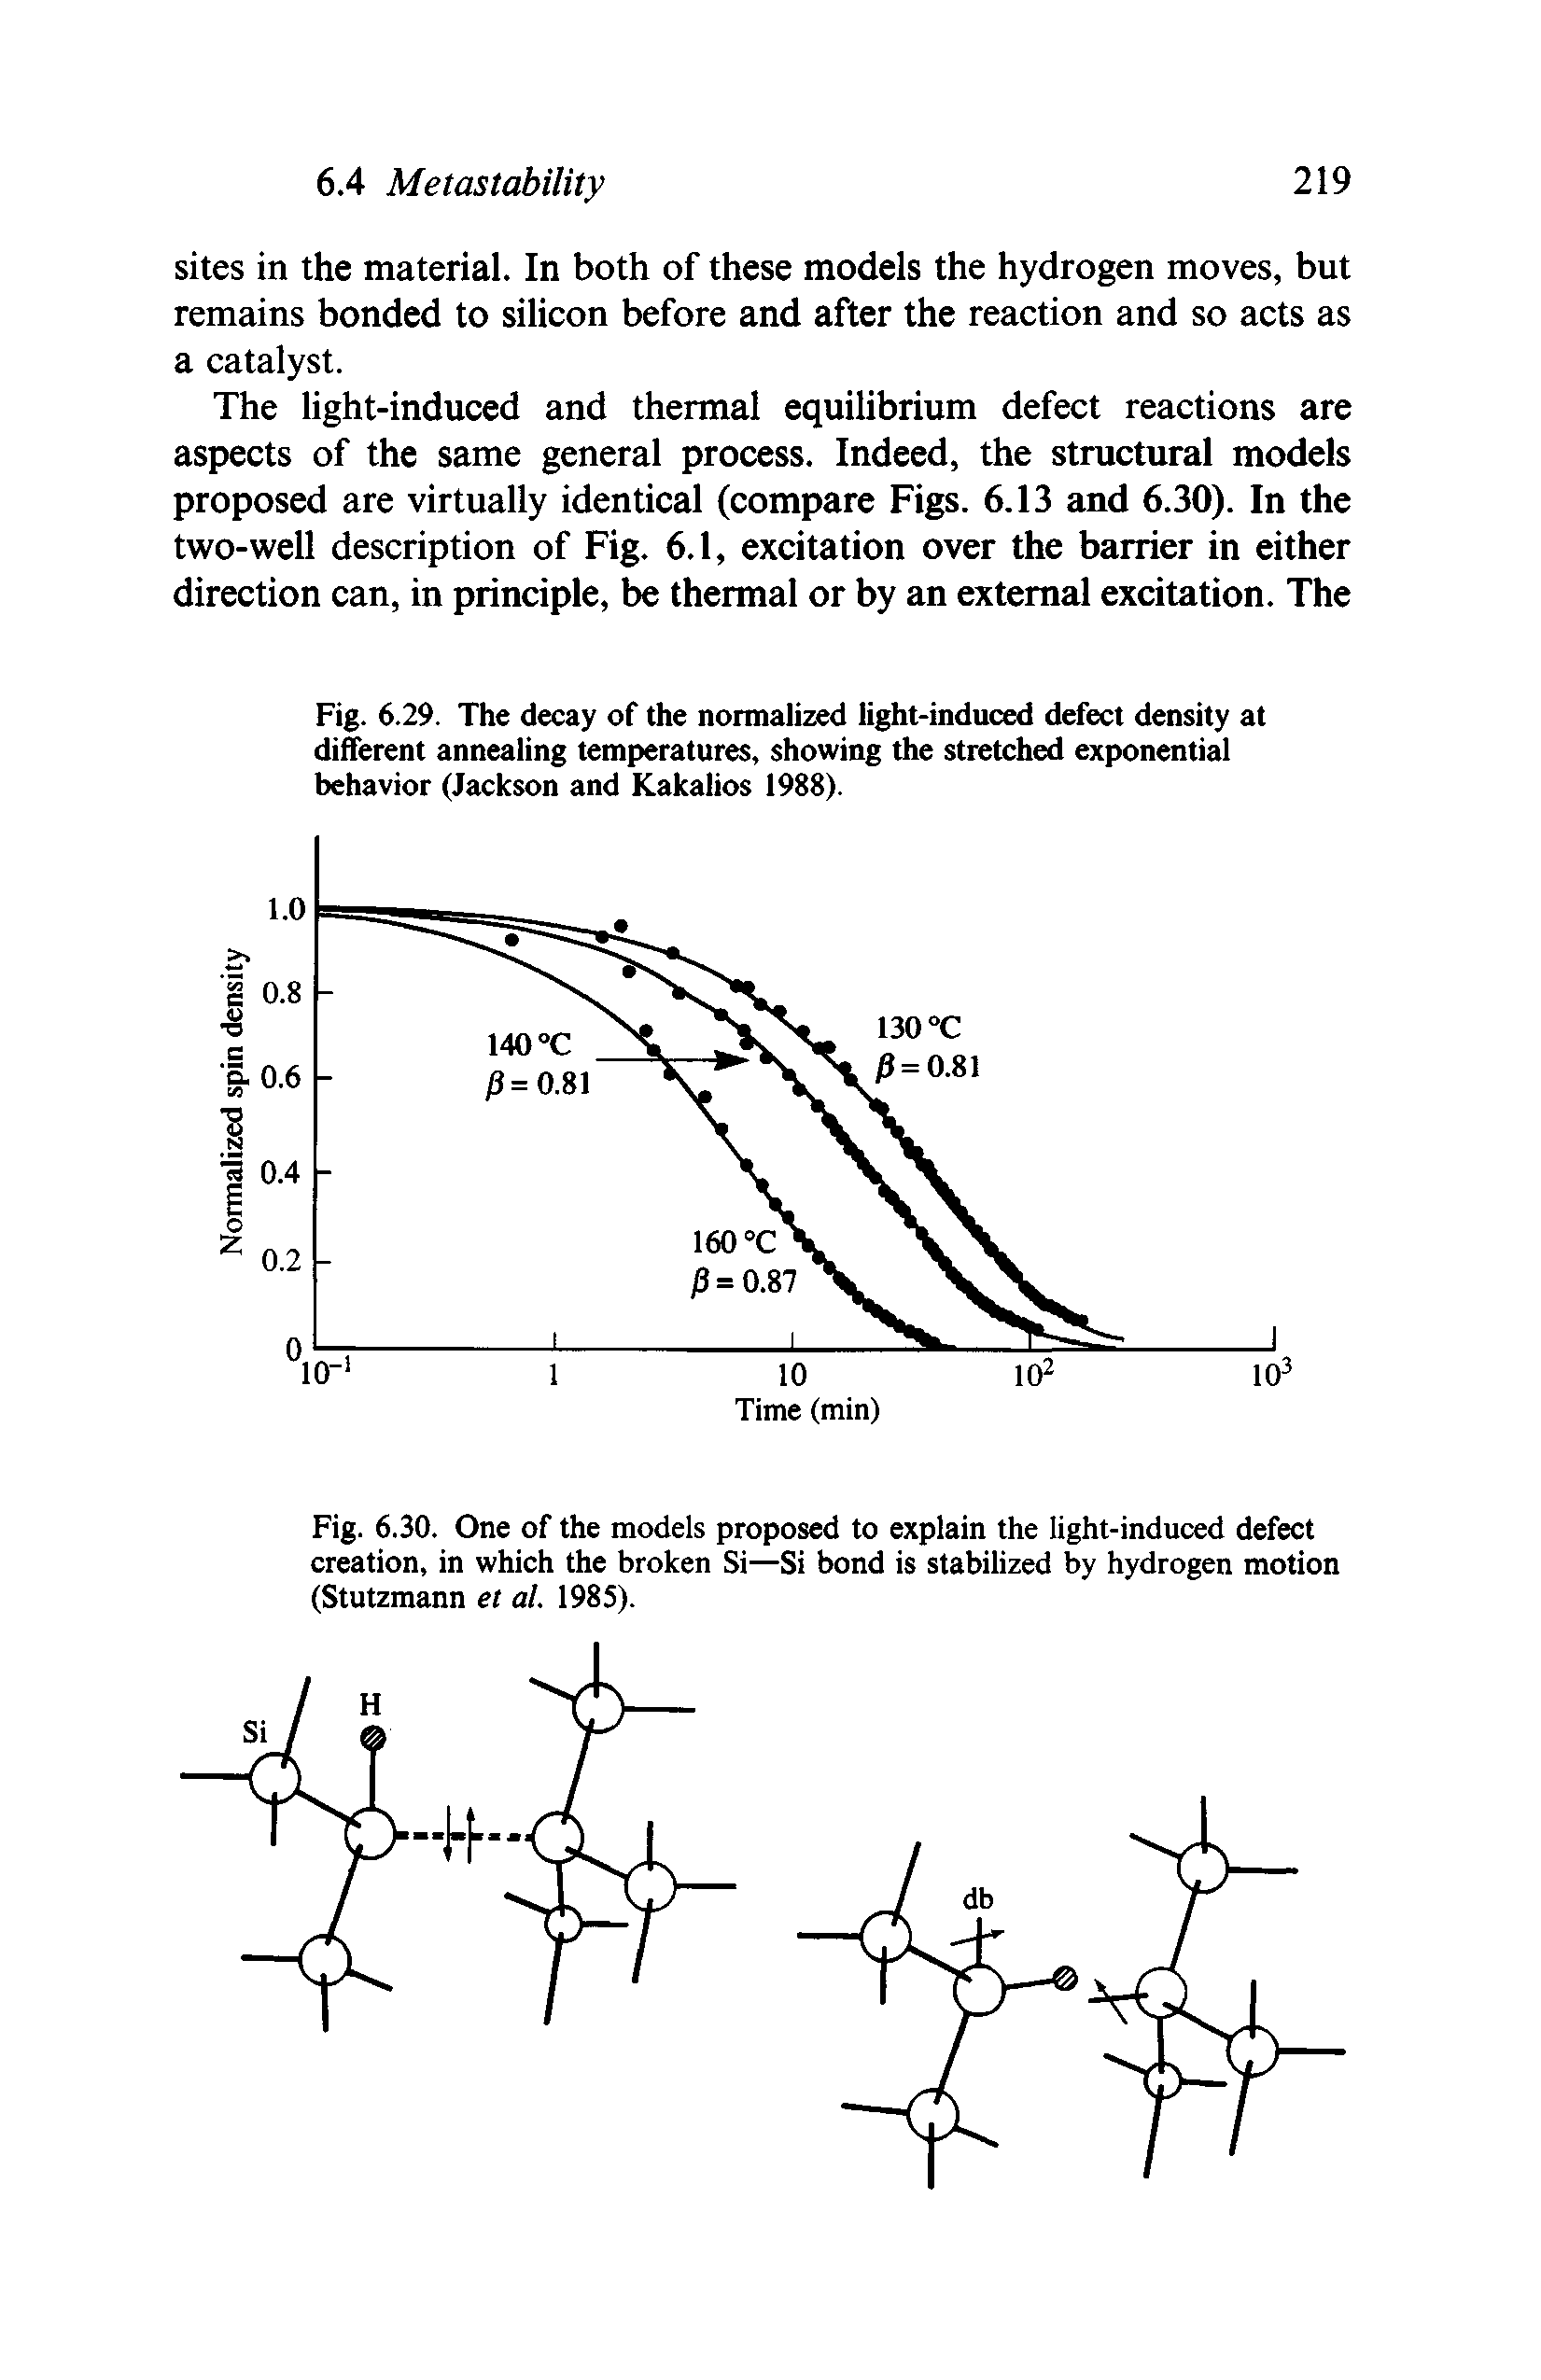 Fig. 6.30. One of the models proposed to explain the light-induced defect creation, in which the broken Si—Si bond is stabiUzed by hydrogen motion (Stutzmann et al. 1985).